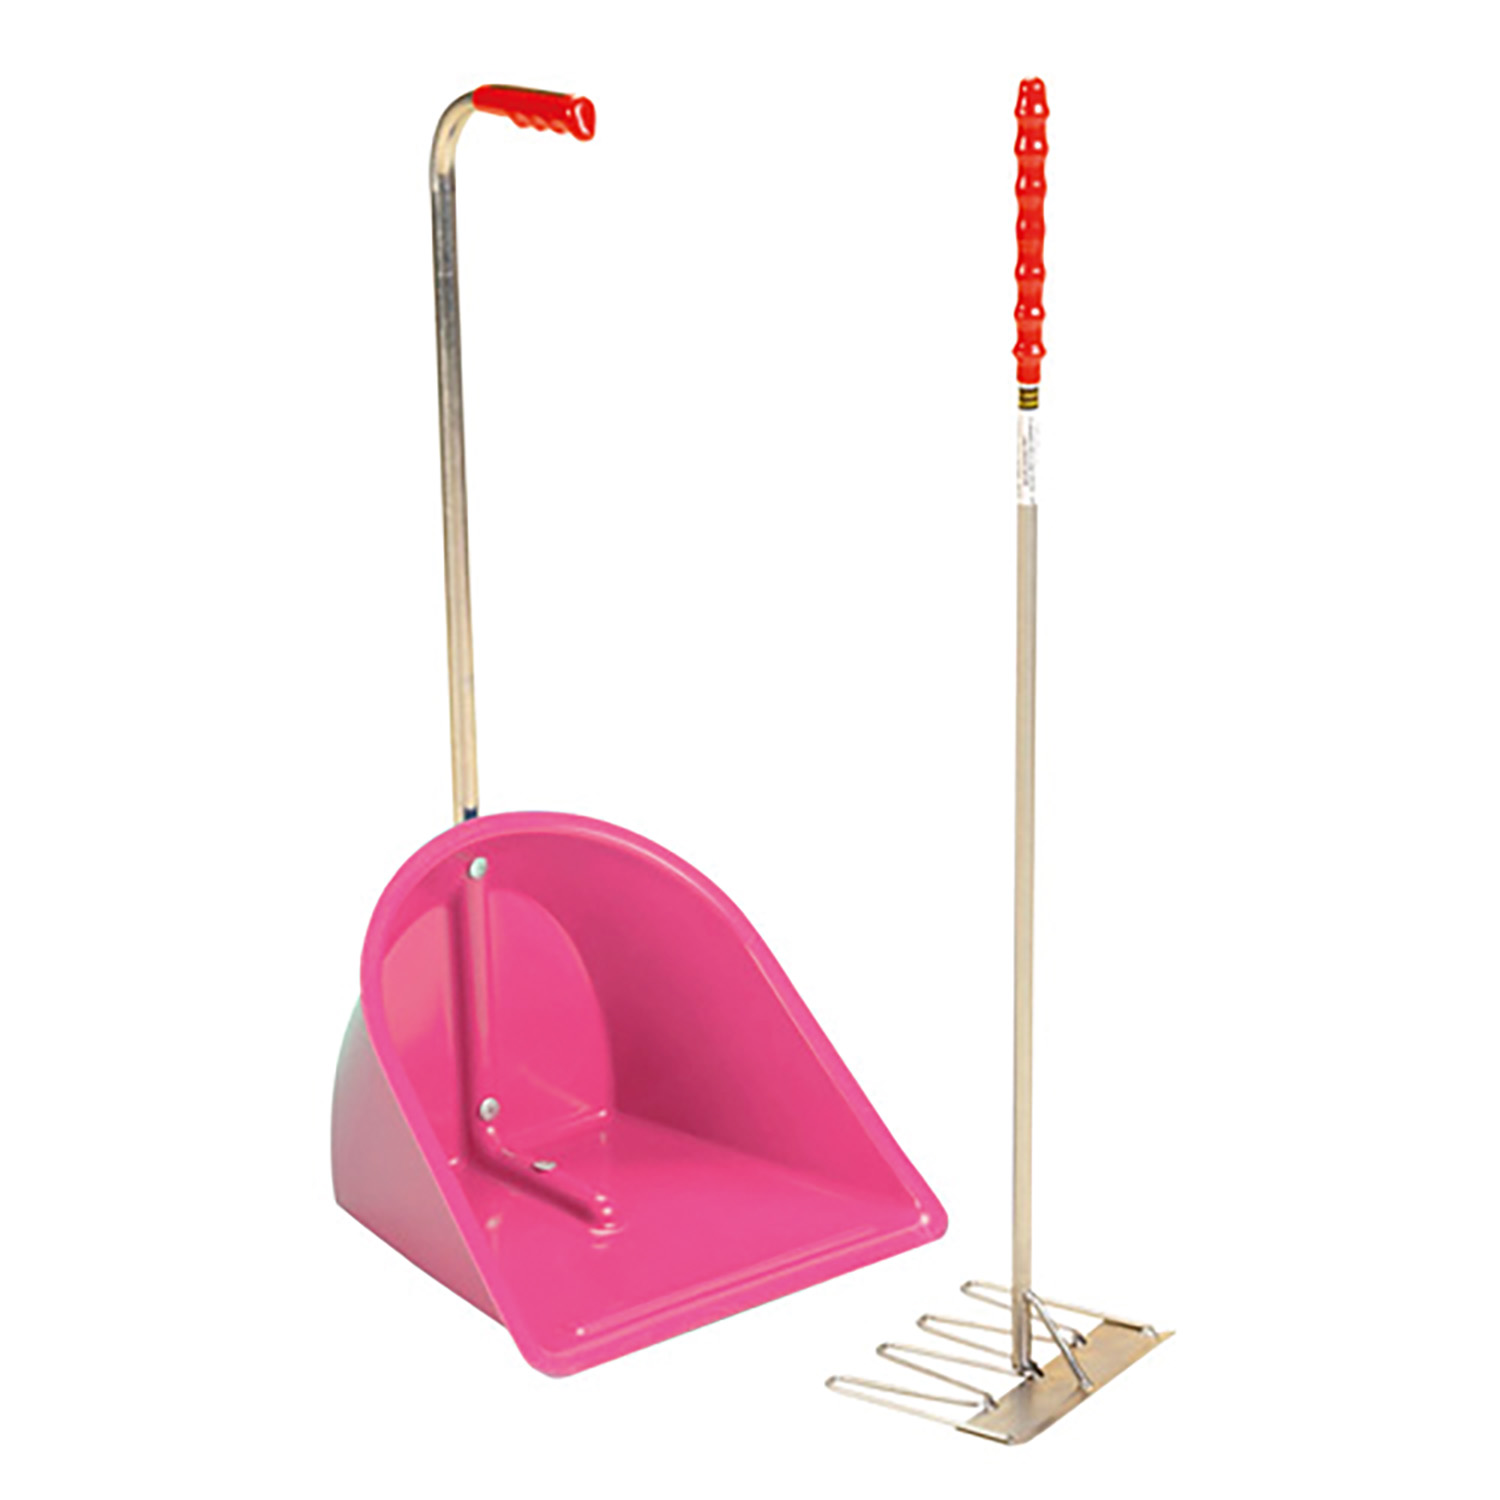 STUBBS STABLE MATE MANURE COLLECTOR HIGH C/W RAKE S4585 PINK